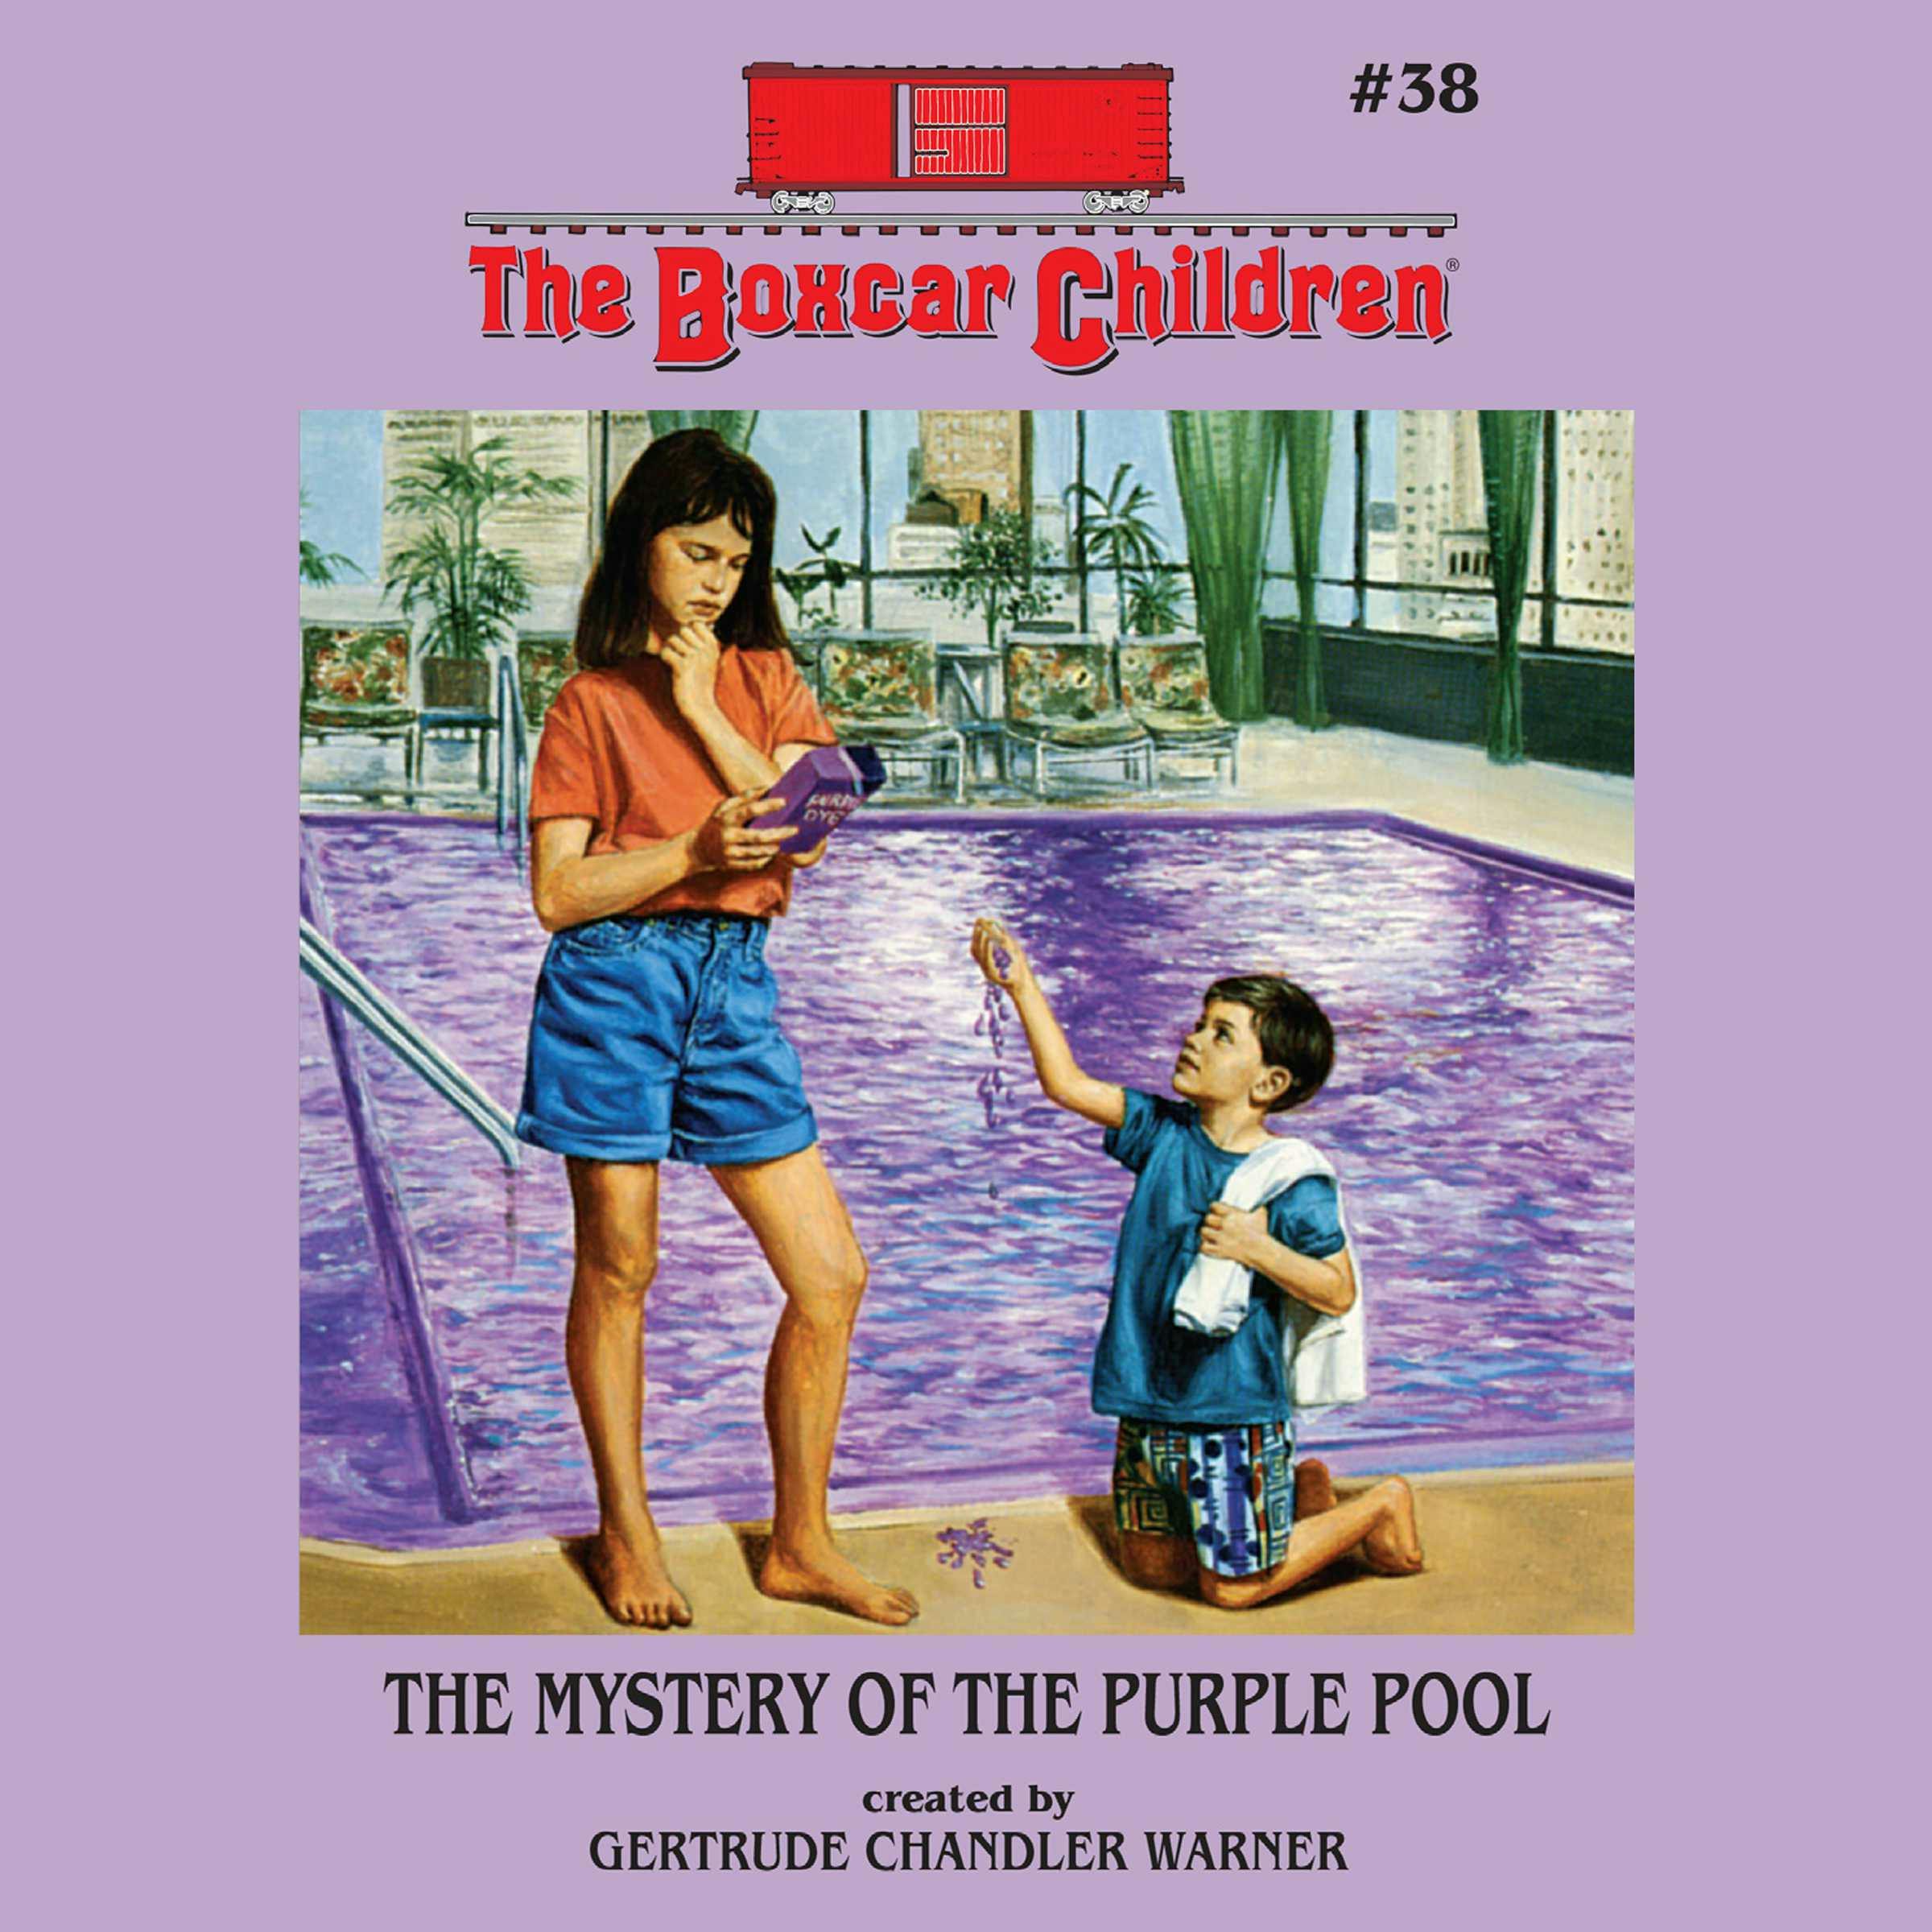 The Mystery of the Purple Pool - Gertrude Chandler Warner